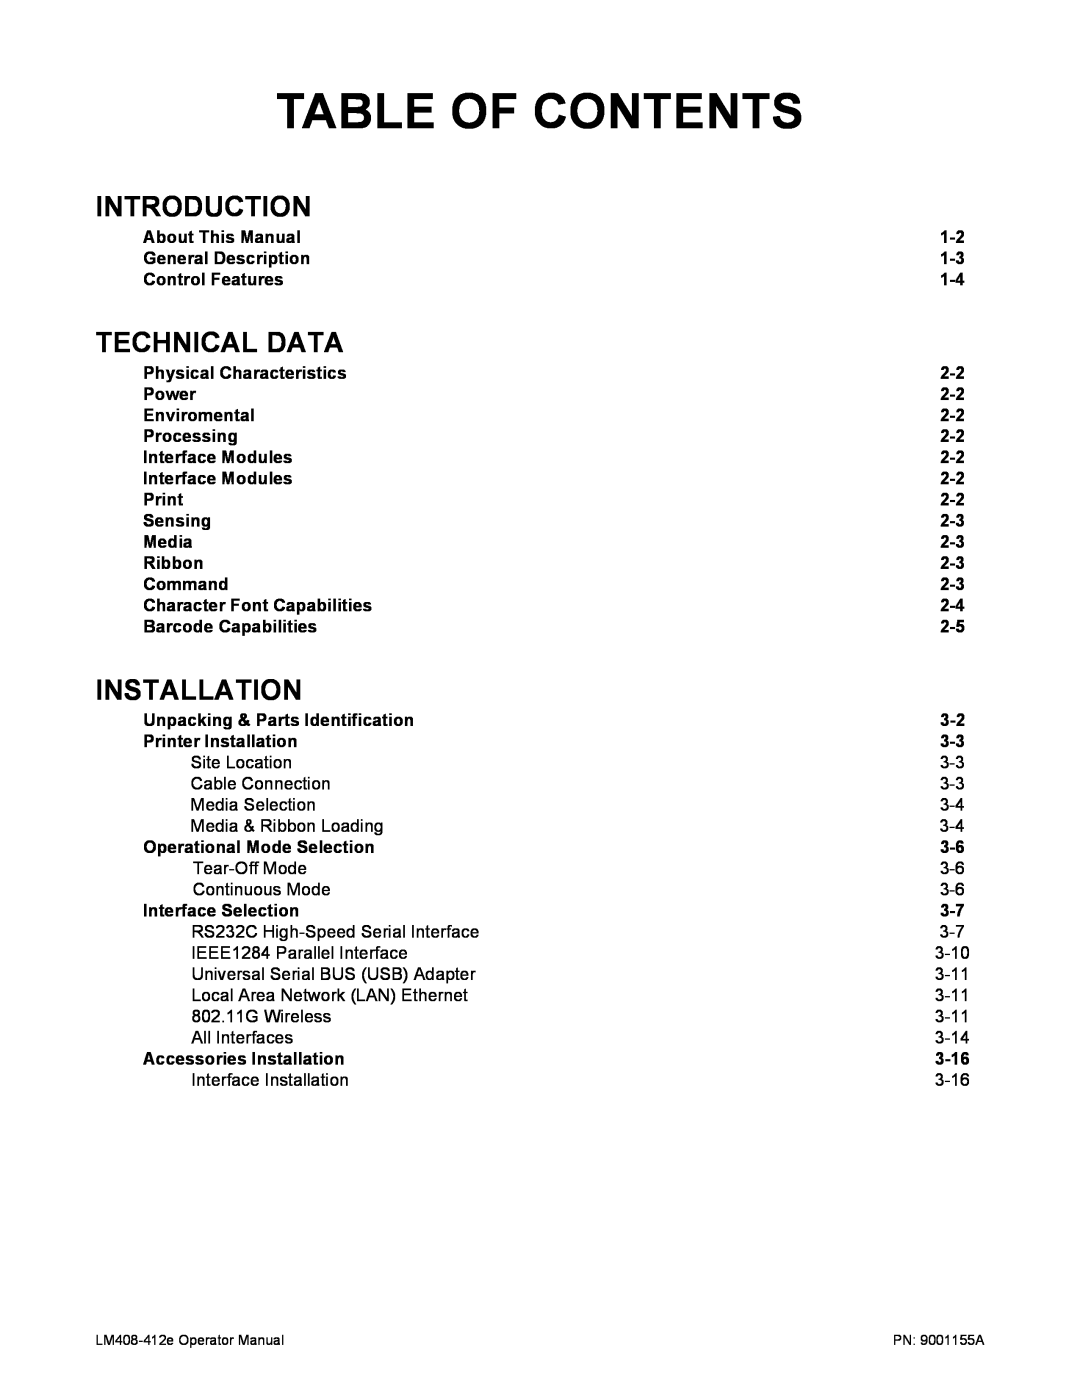 SATO LM408/412E manual Introduction, Technical Data, Installation, Table Of Contents 